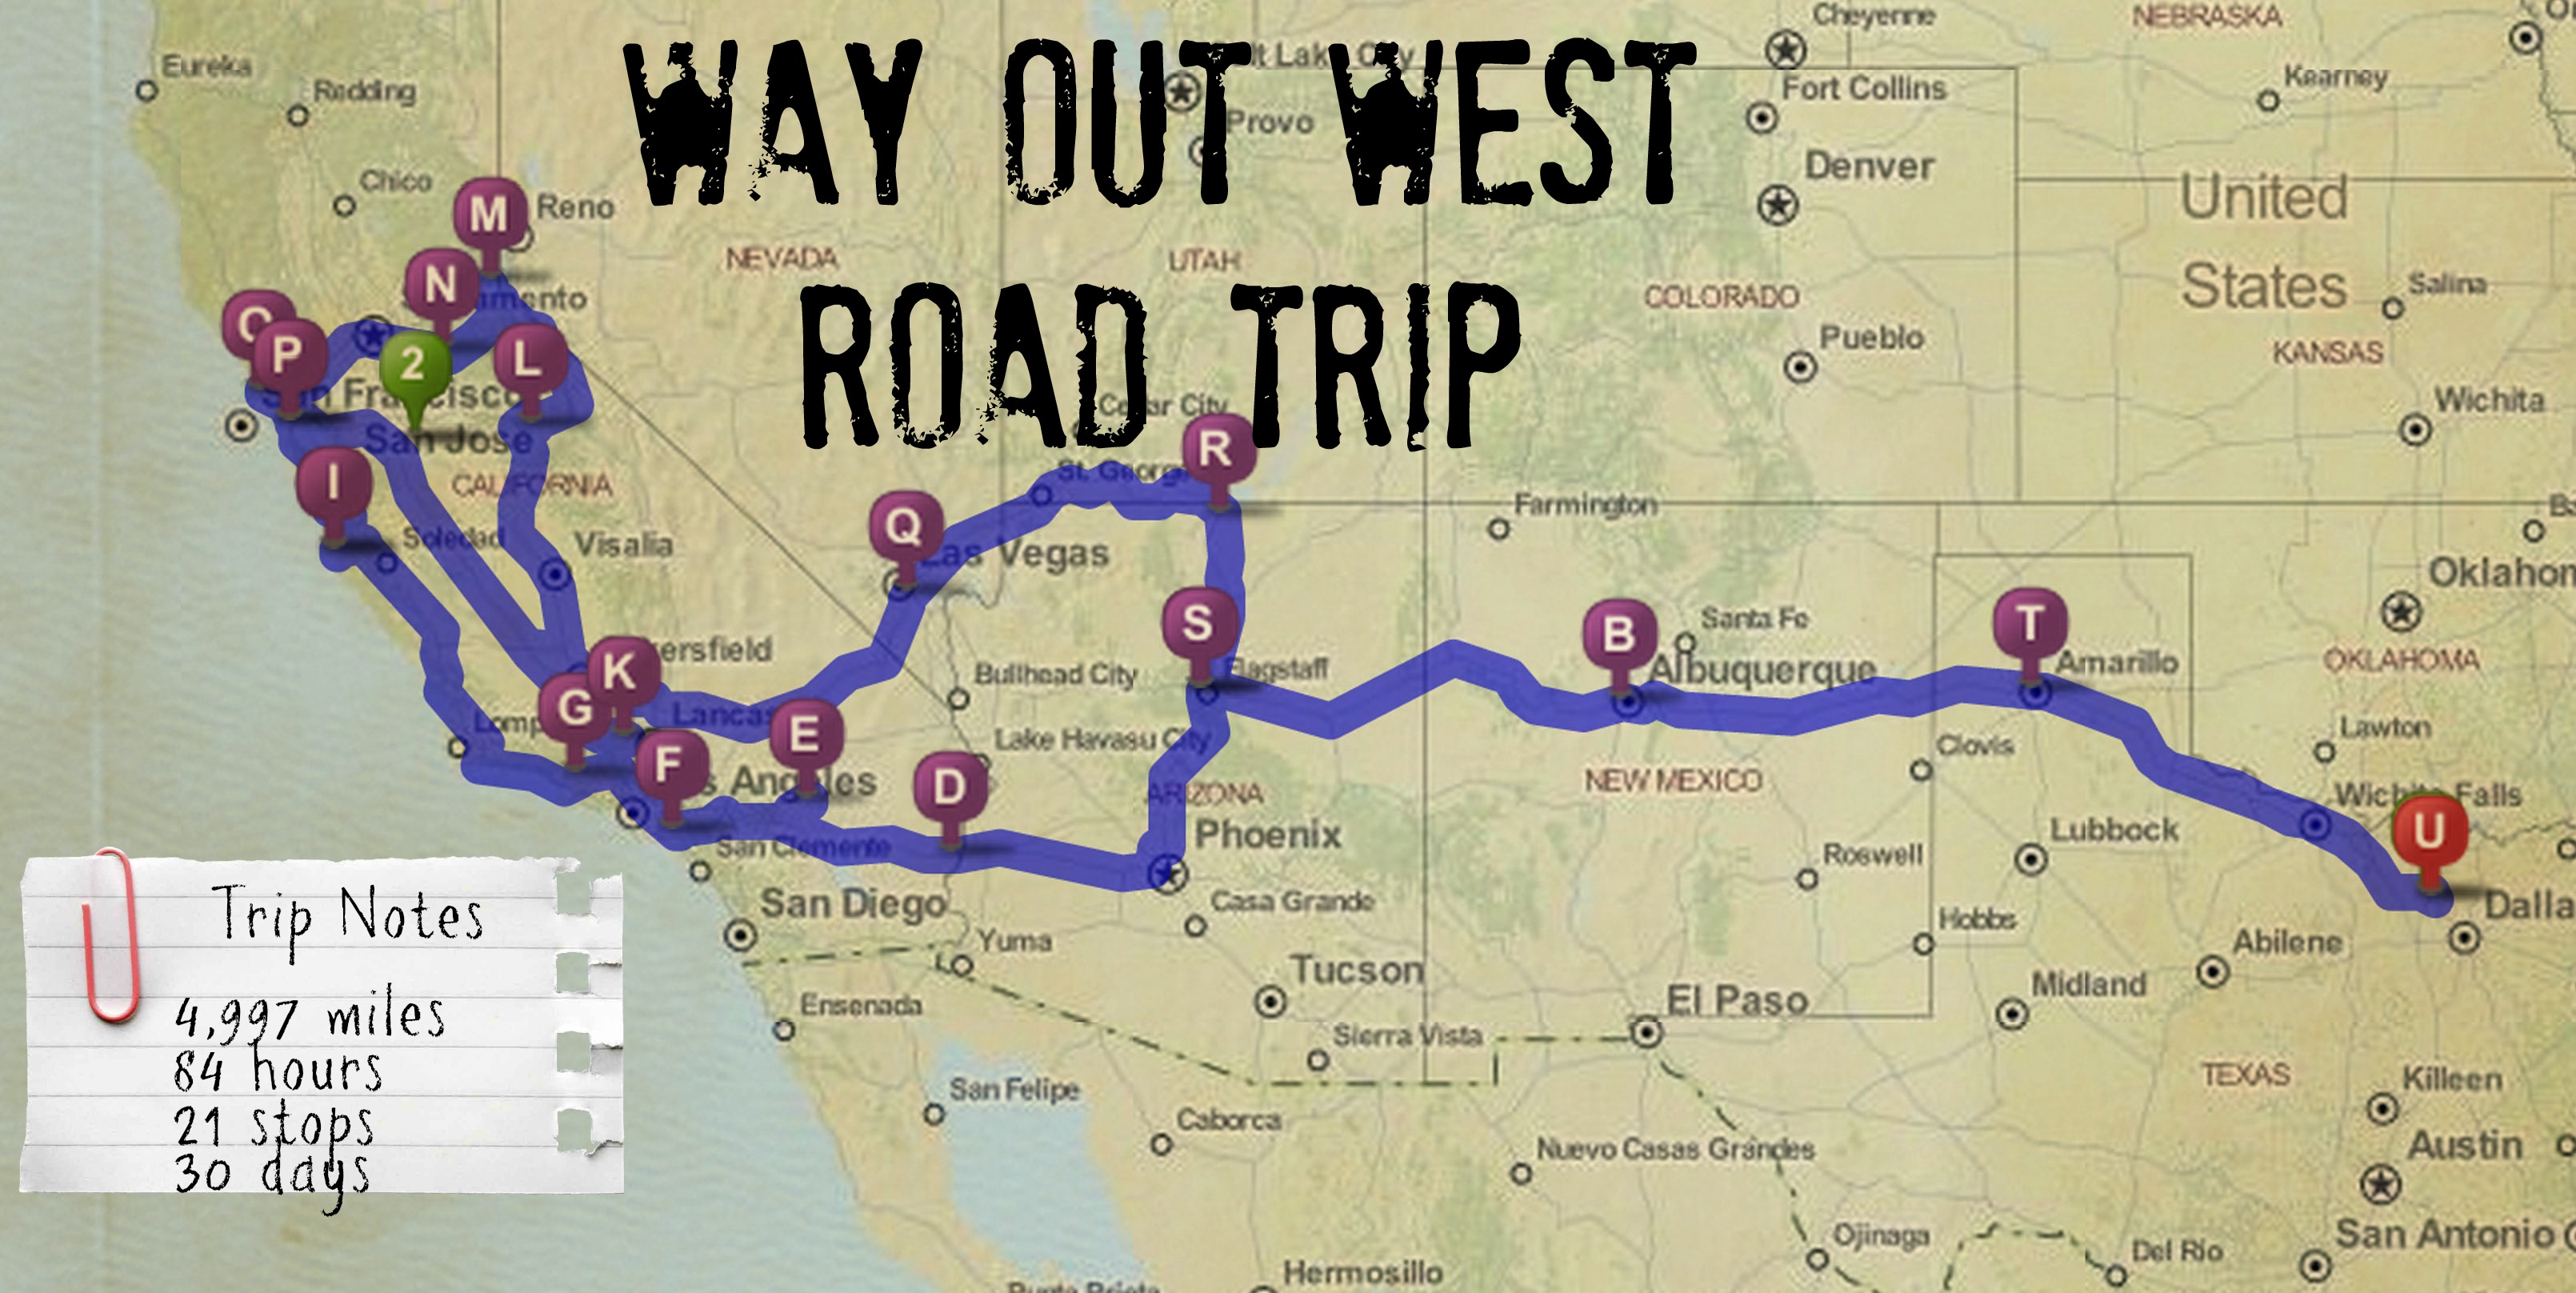 Roadtrippin’ Way Out West Itinerary